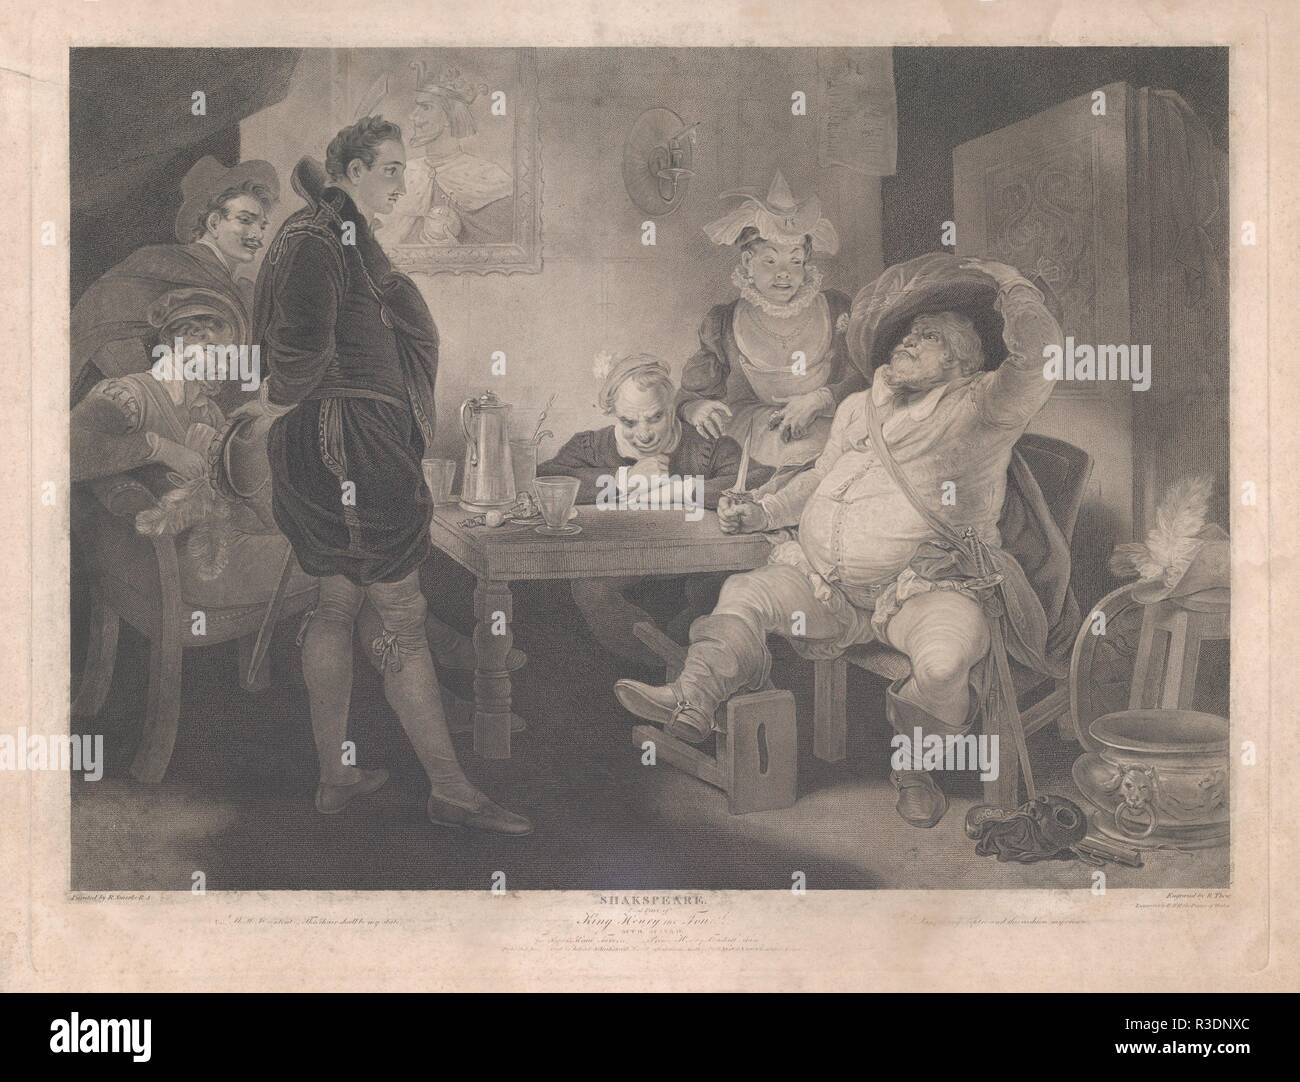 Falstaff, Prince Henry and Poins at the Boar's Head Tavern (Shakespeare, King Henry the Fourth, Part 1, Act 2, Scene 4). Artist: After Robert Smirke (British, Wigton, Cumberland 1752/53-1845 London). Dimensions: Plate: 19 11/16 × 25 3/16 in. (50 × 64 cm). Engraver: Robert Thew (British, Patrington 1758-1802 Stevenage). Publisher: John & Josiah Boydell (British, 1786-1804). Series/Portfolio: Boydell's Shakespeare Gallery. Subject: William Shakespeare (British, Stratford-upon-Avon 1564-1616 Stratford-upon-Avon). Date: 1796. Museum: Metropolitan Museum of Art, New York, USA. Stock Photo